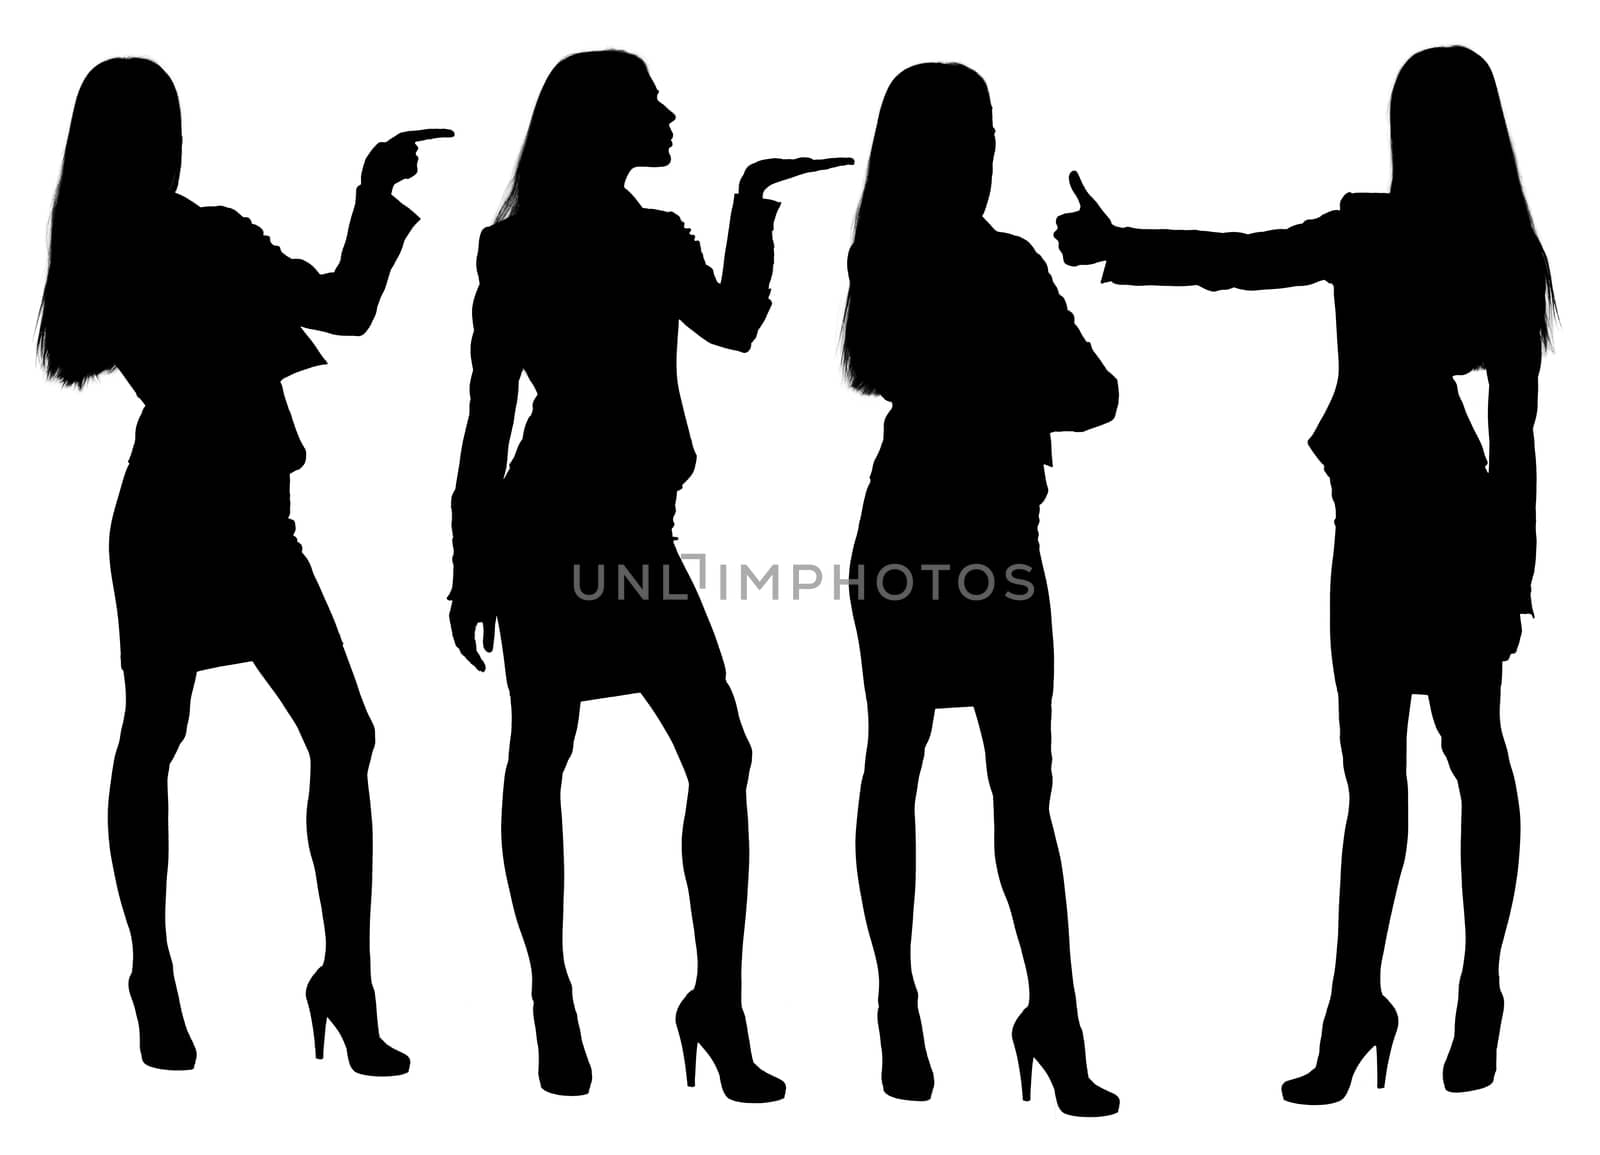 Silhouettes of businesswoman in different postures, different views